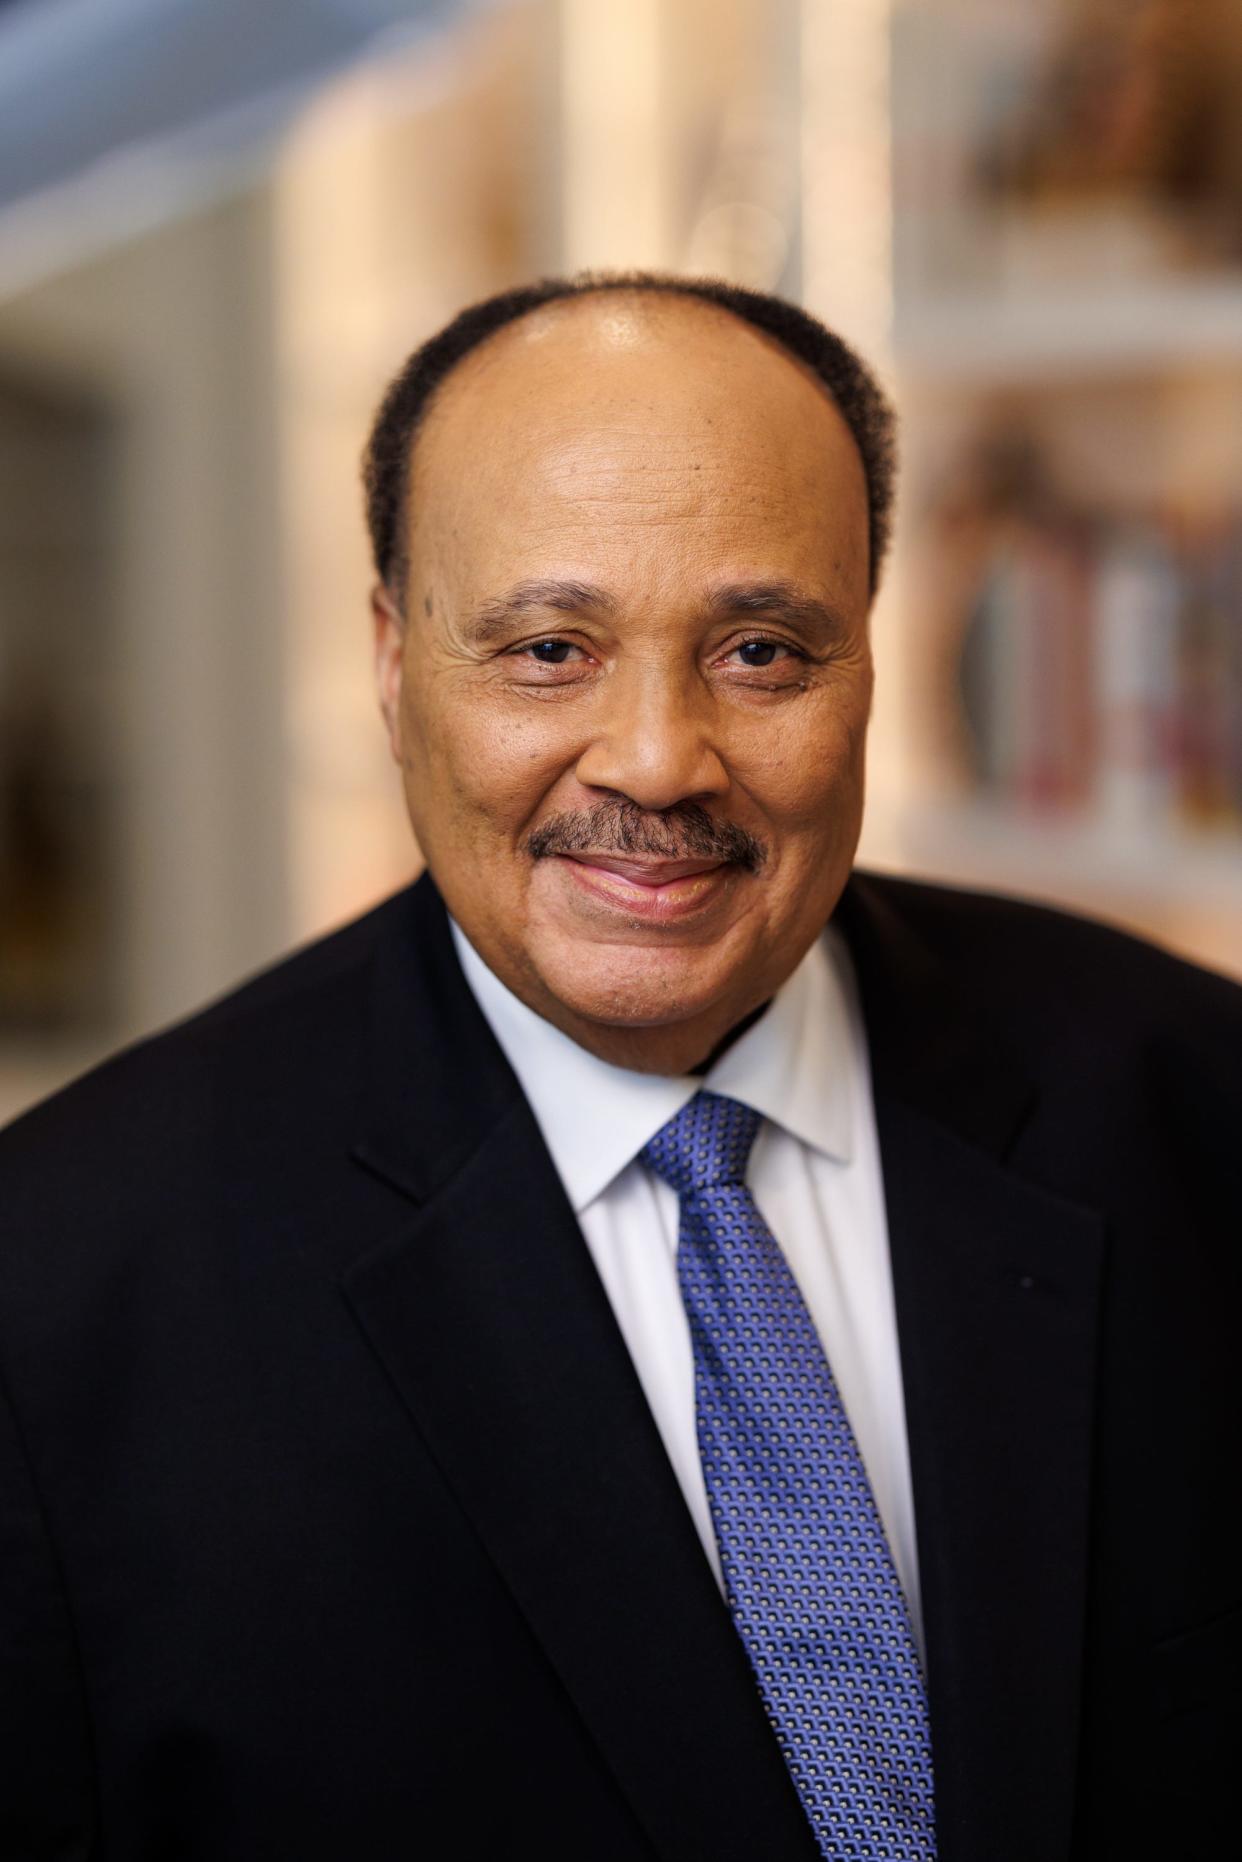 Martin Luther King III talks about his father, his name, history and hope